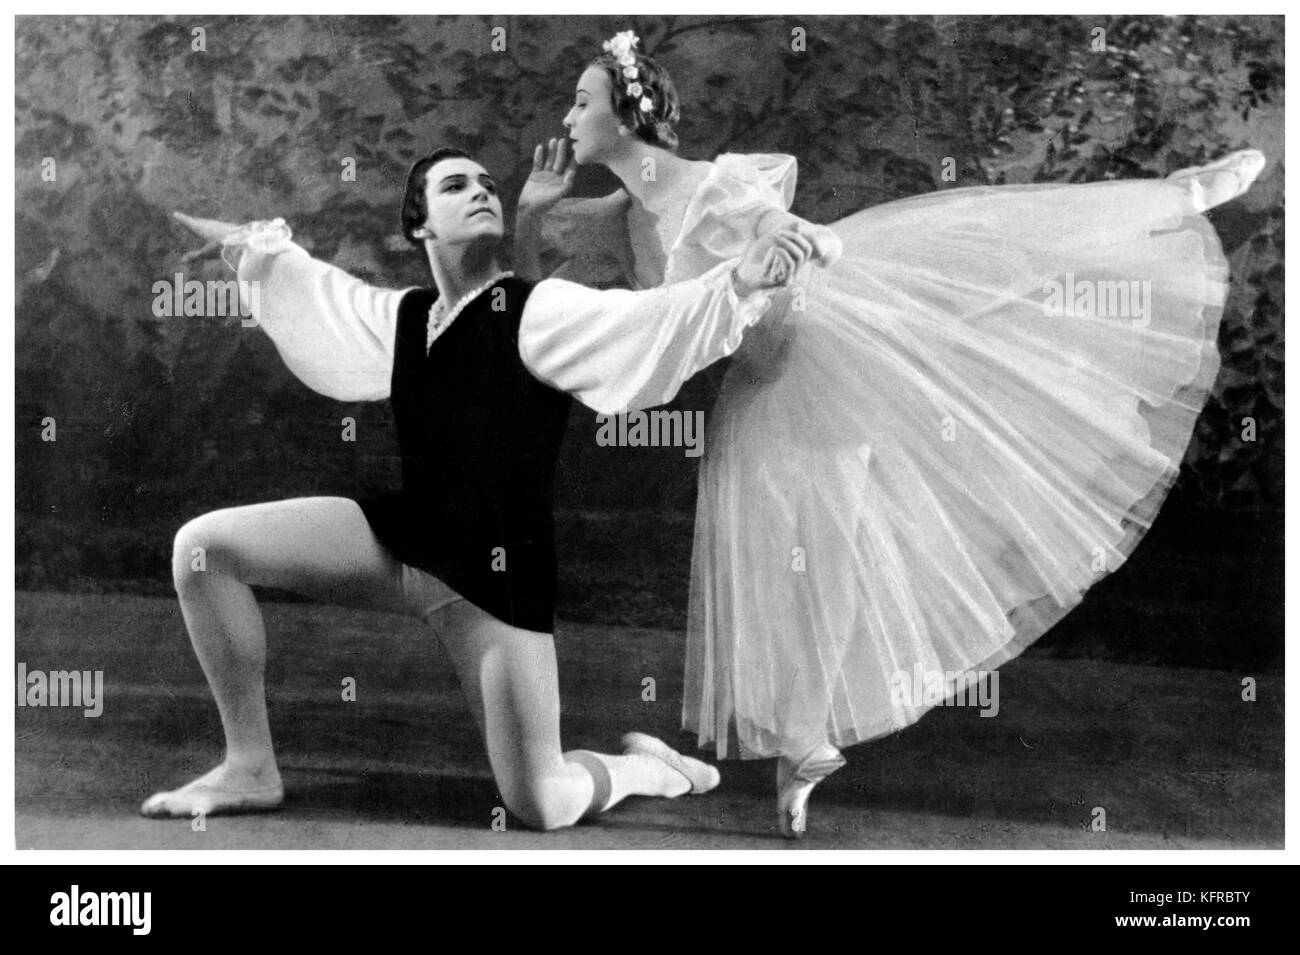 Galina Ulanova and  Nikolai Fadeyechev in Les Sylphides.  Ballet with original choreography  by Michel Fokine, with music by Frédéric Chopin orchestrated by Alexander Glazunov. NF: Russian ballet dancer and pricipal with Bolshoi Ballet, 27 January 1933- . GU: Russian ballerina,  7 January 1910 – 21 March 1998. Stock Photo